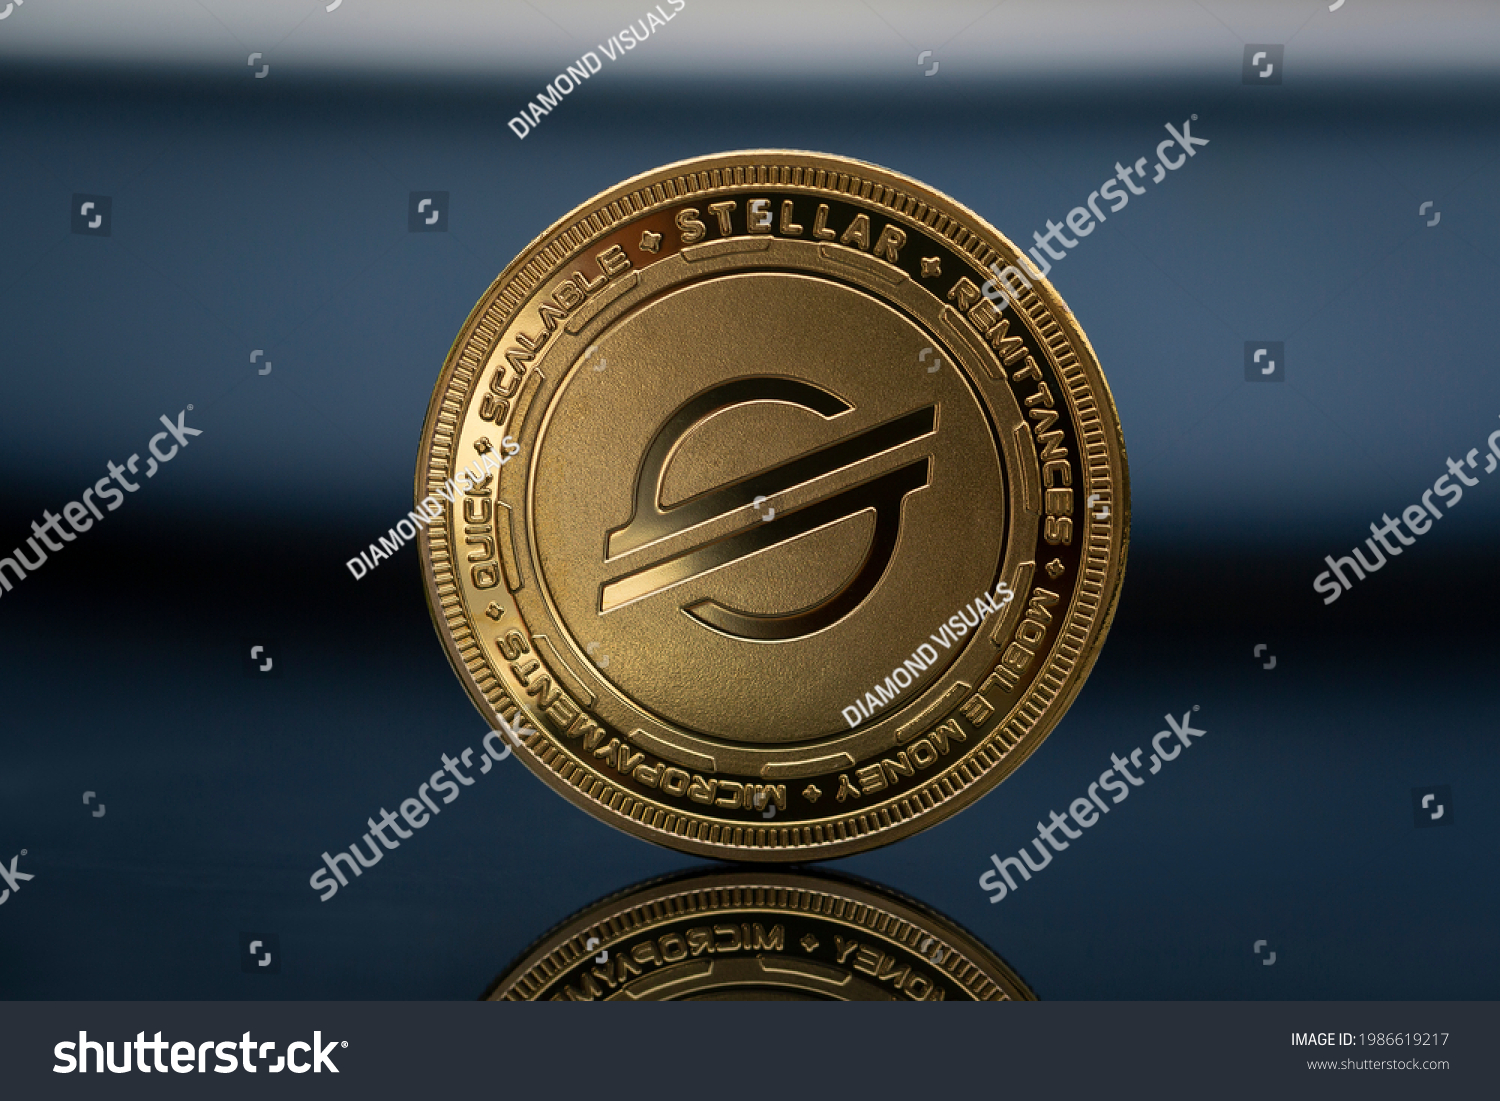 Stellar XLM Lumens Cryptocurrency physical coin placed on the  reflective blue surface #1986619217